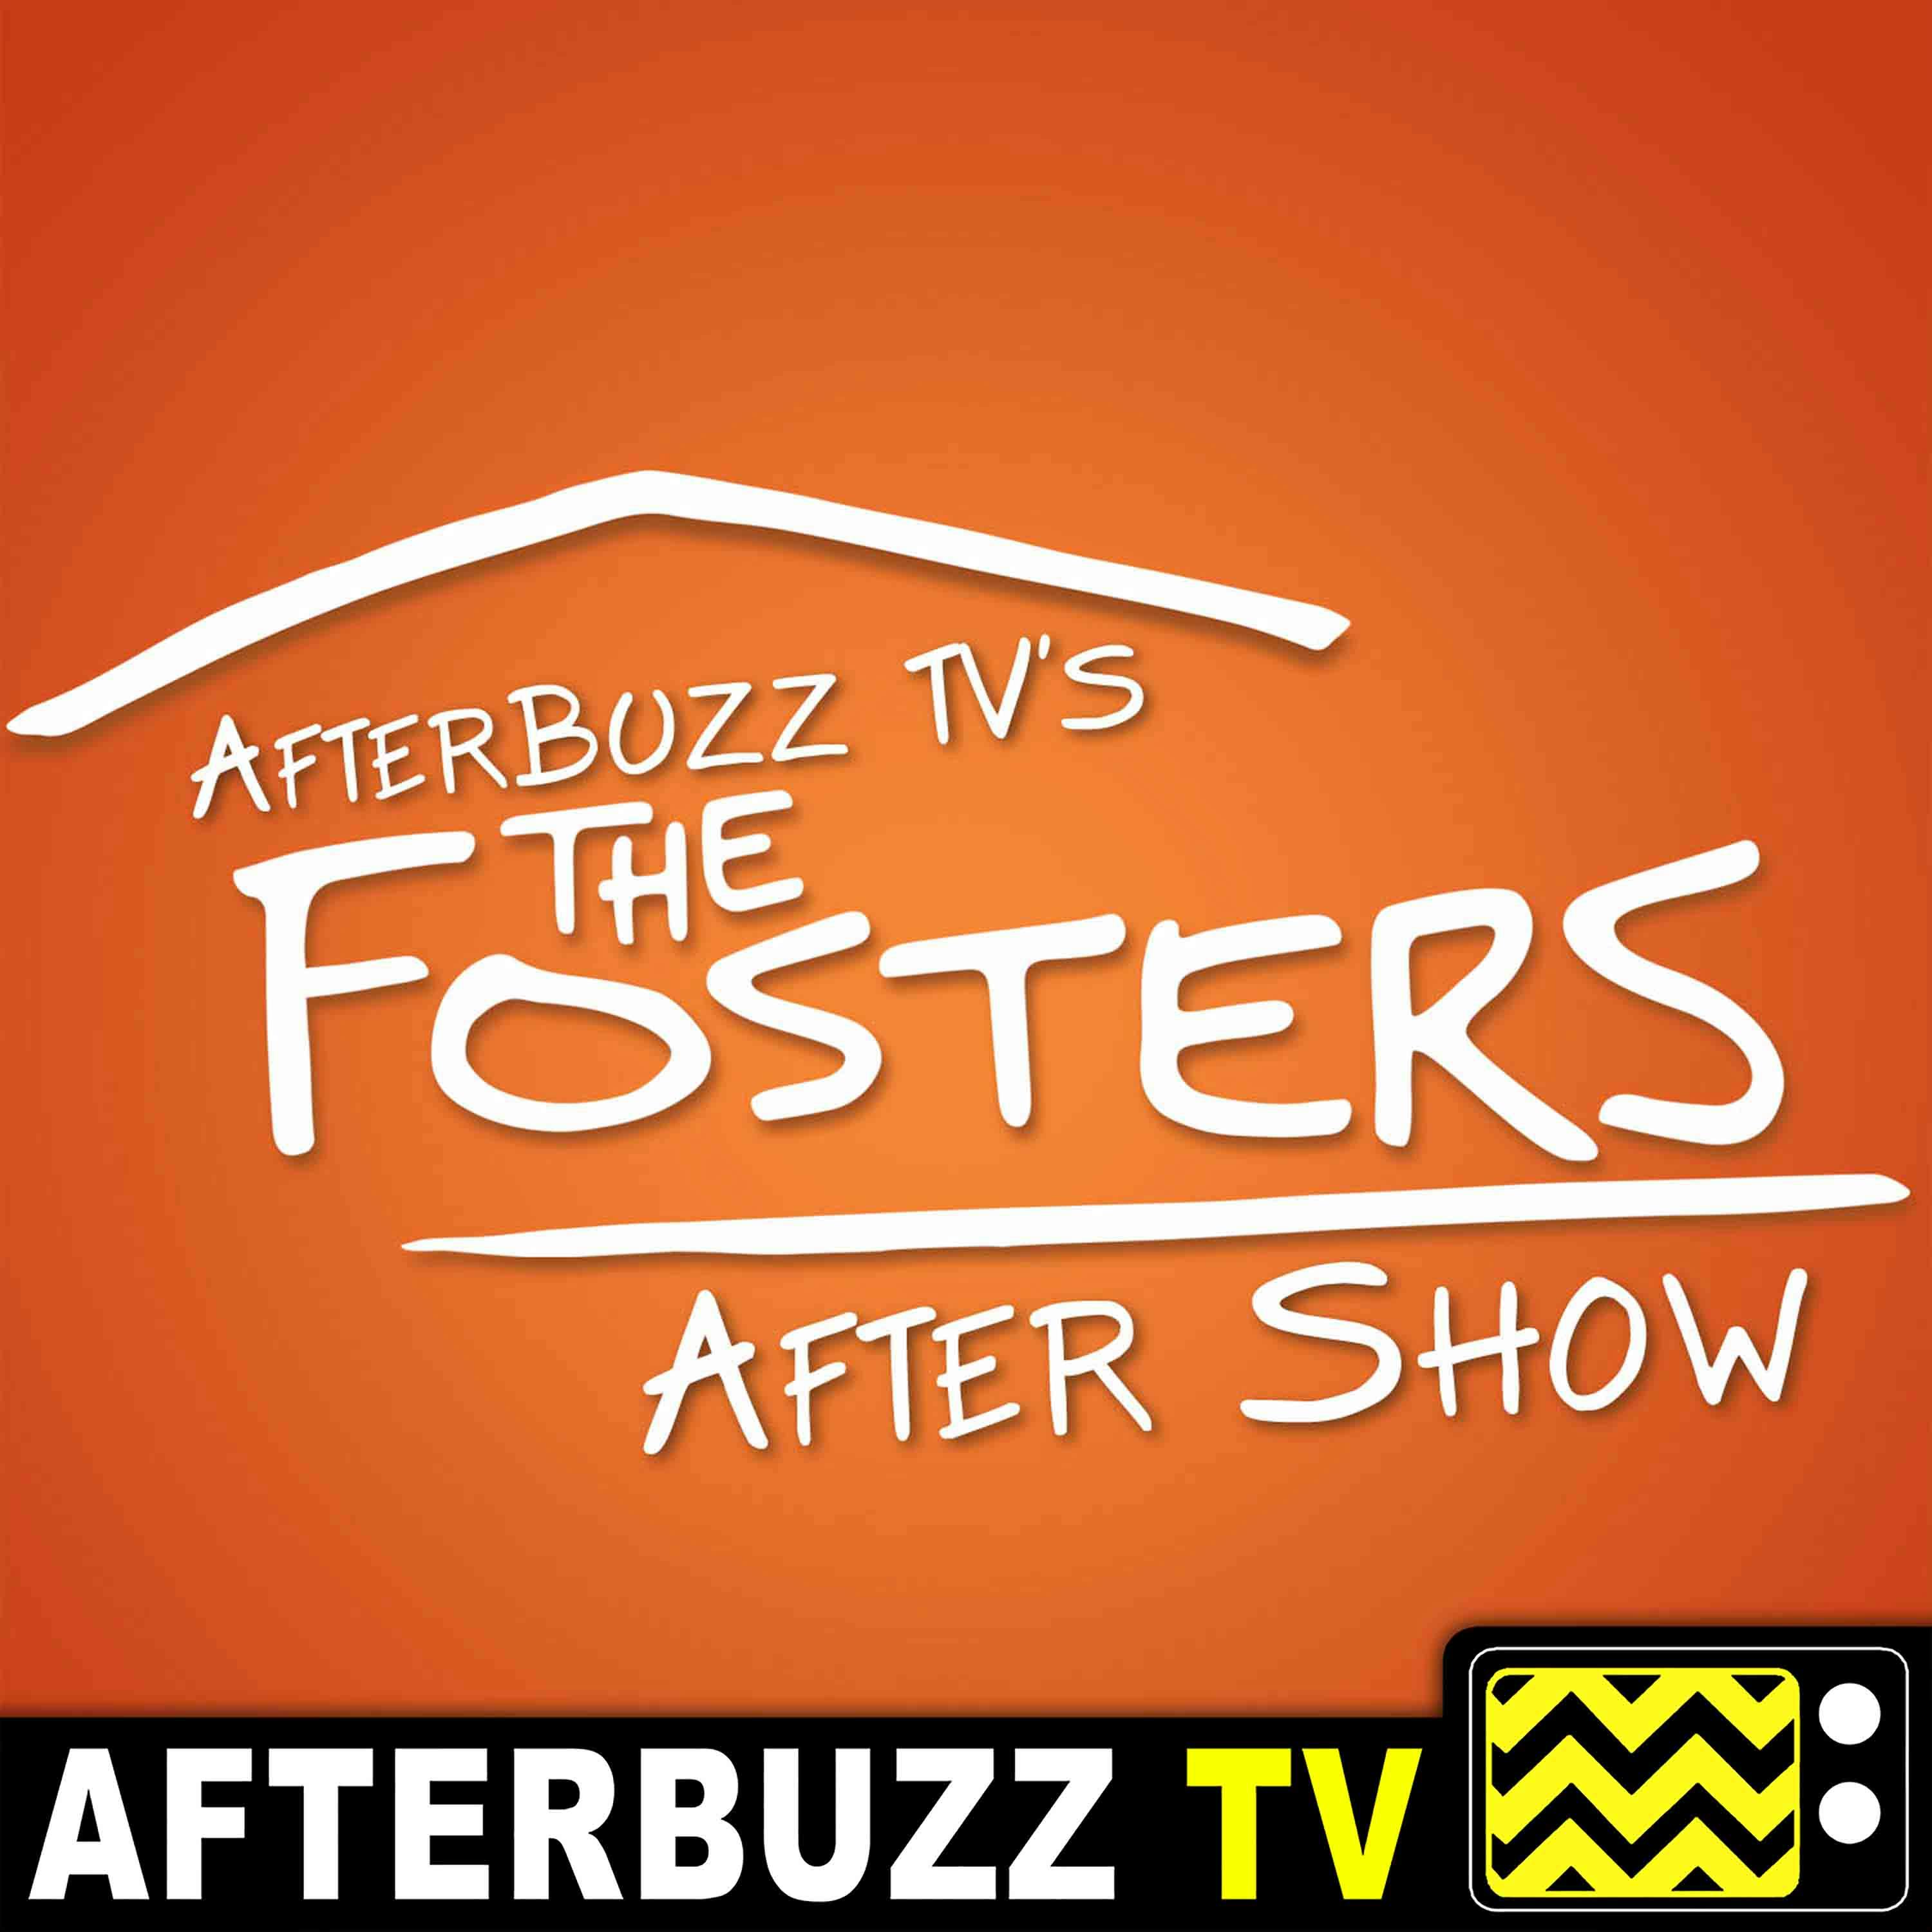 The Fosters S:4 | Noah Centineo guests on Now for Then E:4 | AfterBuzz TV AfterShow